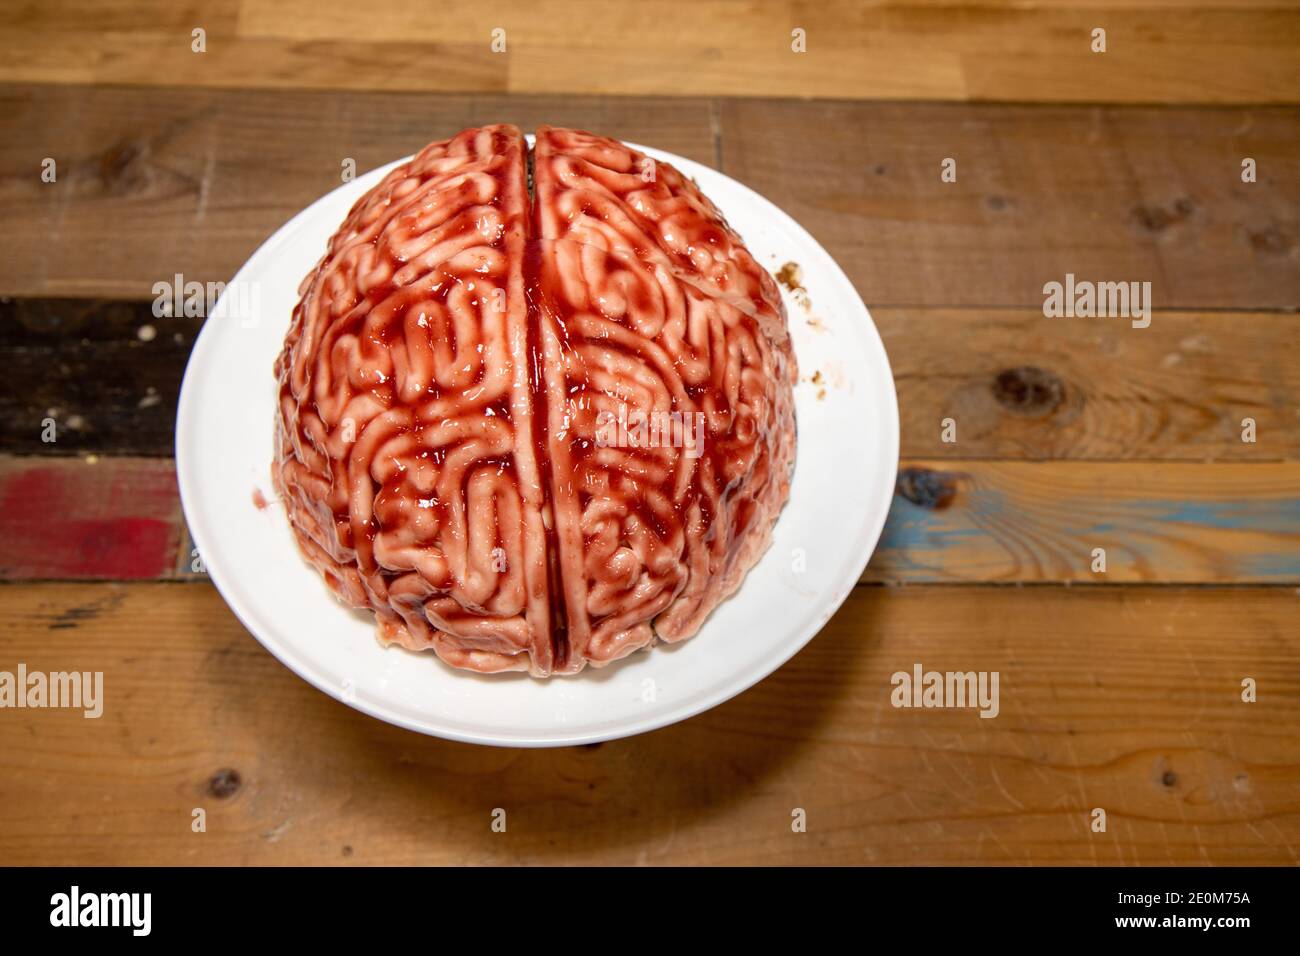 A cake in the shape of a brain with strawberry source brushed on it to make the sponge cake look like a real human bloody brain for the halloween part Stock Photo